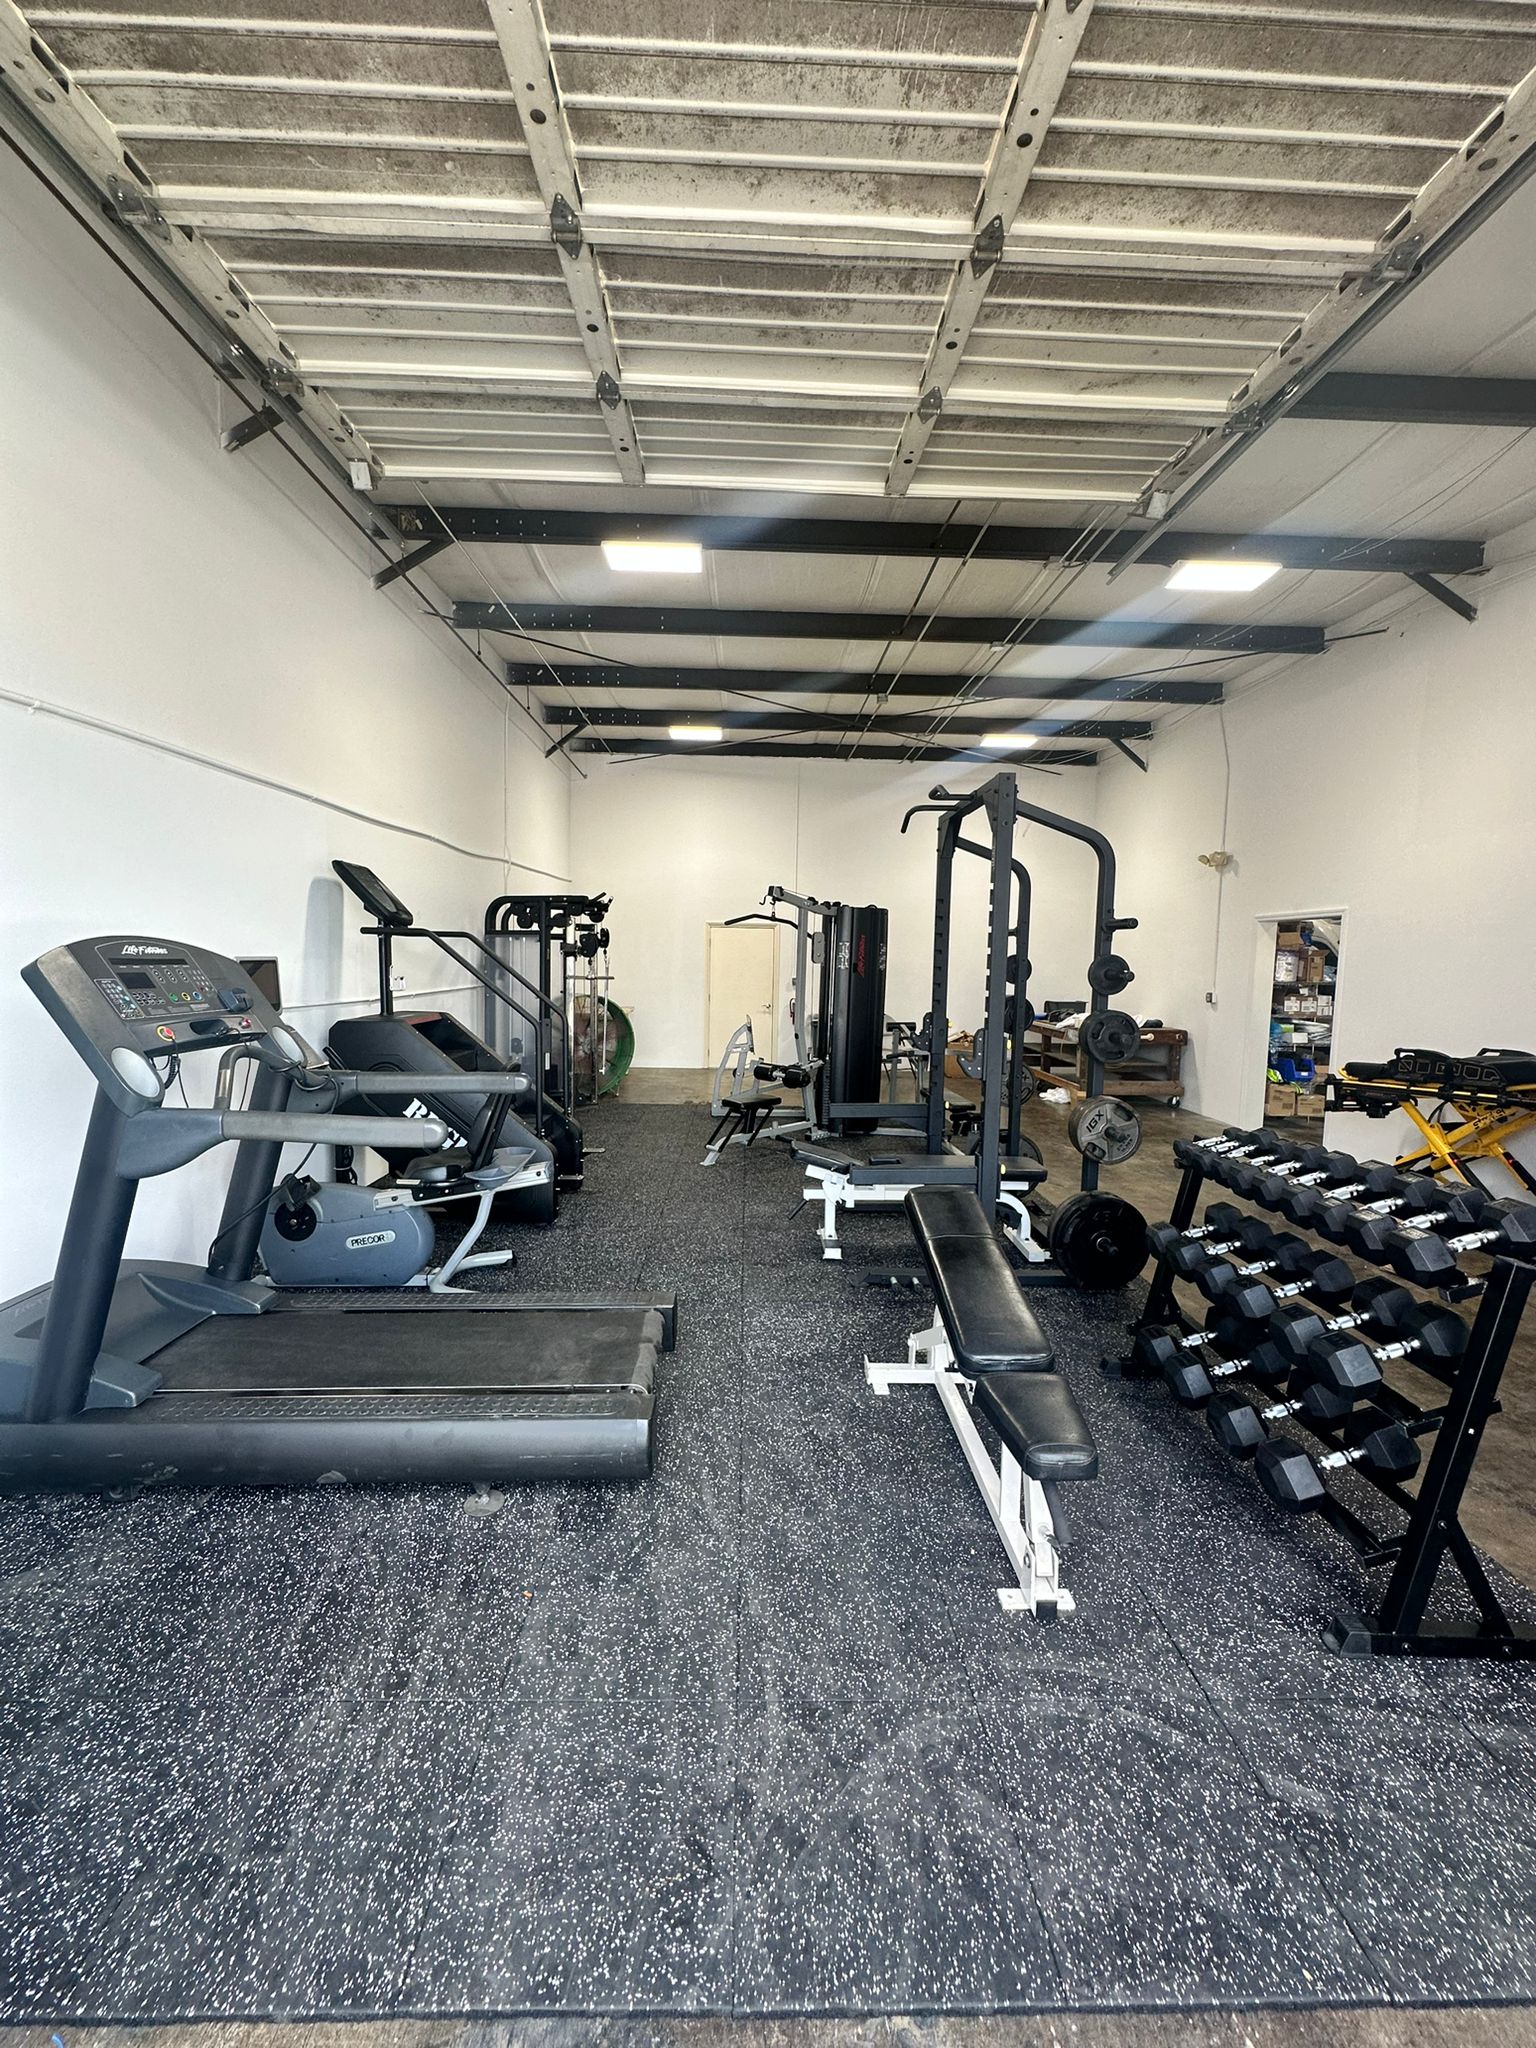 Check out the gym at our Central Florida station.  NHT enjoy free use of all the equipment to stay in top notch shape.